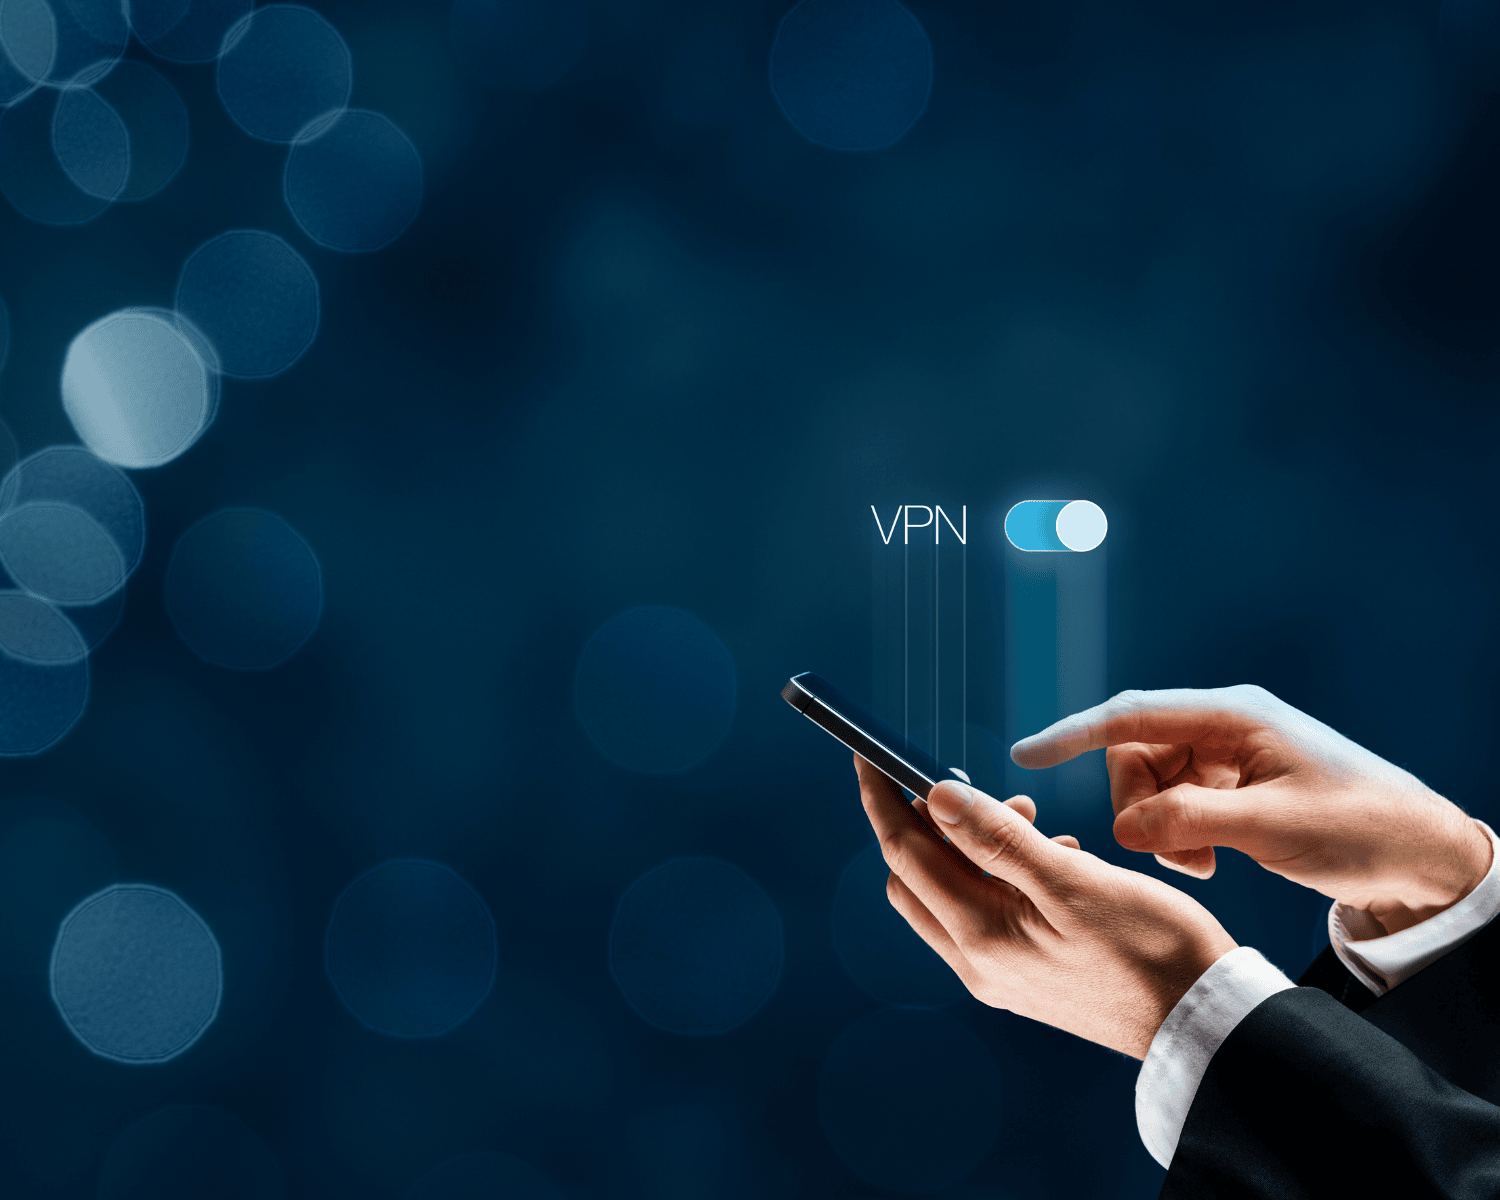 Man holding a phone with the words "VPN" hovering above.